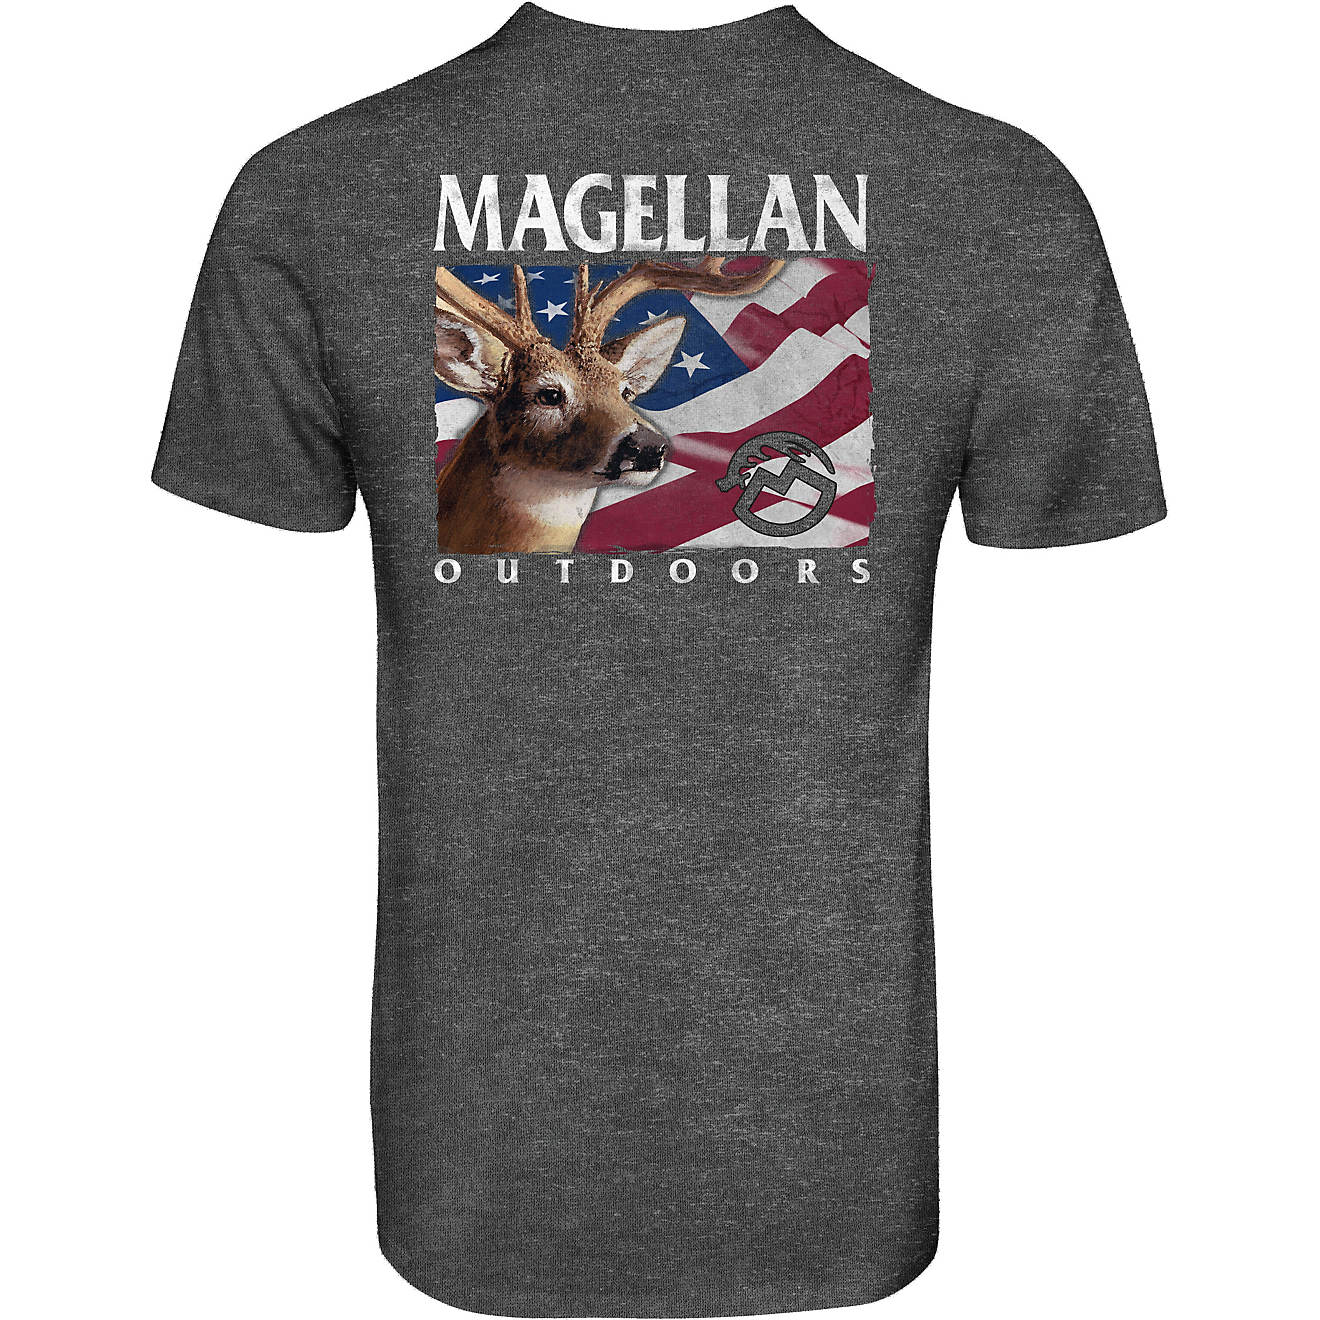 Magellan Outdoors Men’s Rack White and Blue Graphic T-shirt                                                                    - view number 1